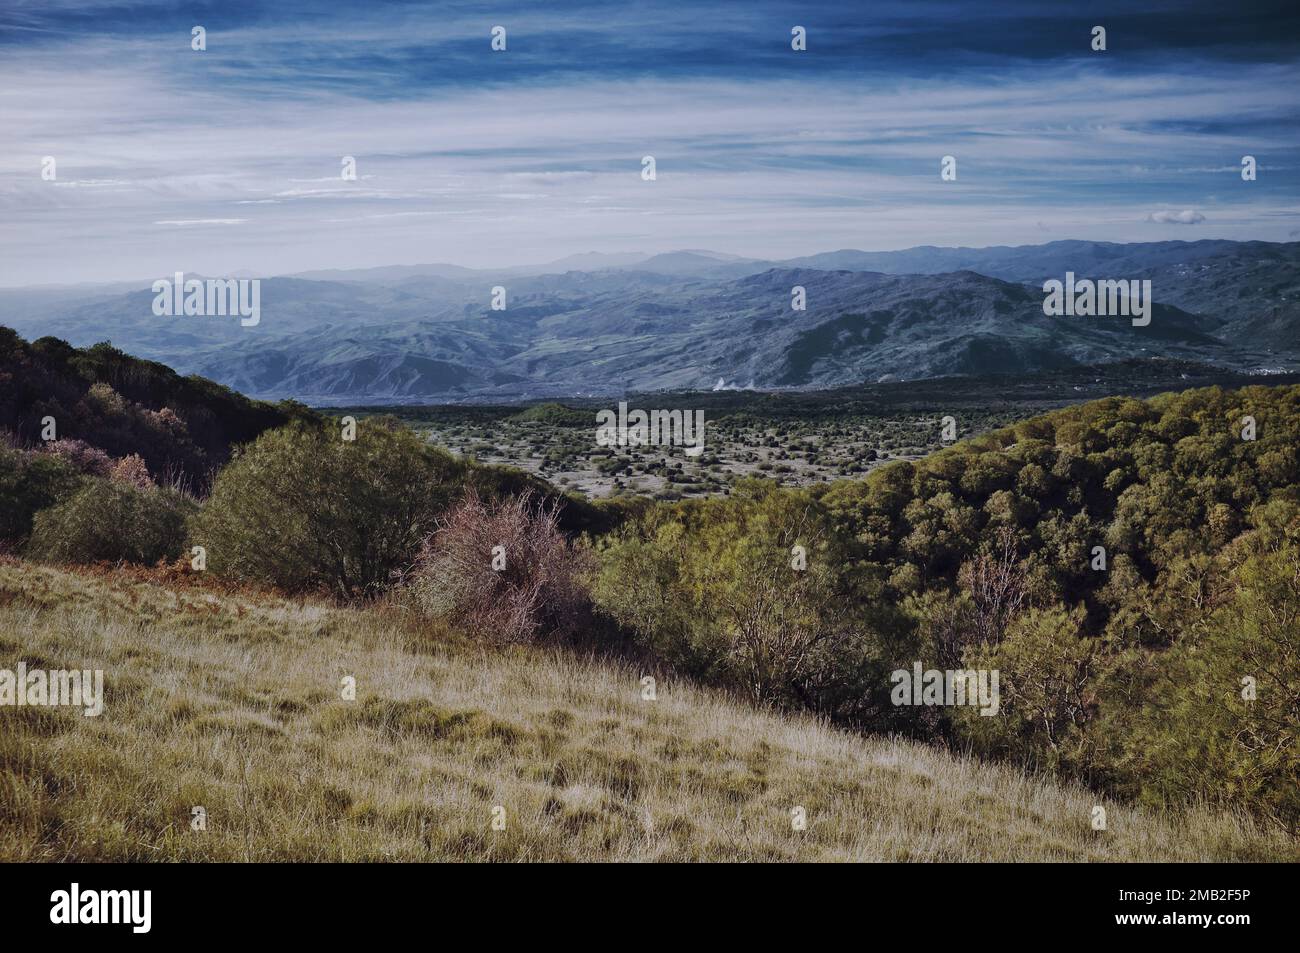 italian landscape of a open valley and distance view of a mountain range in Sicily from Etna National Park, Italy Stock Photo